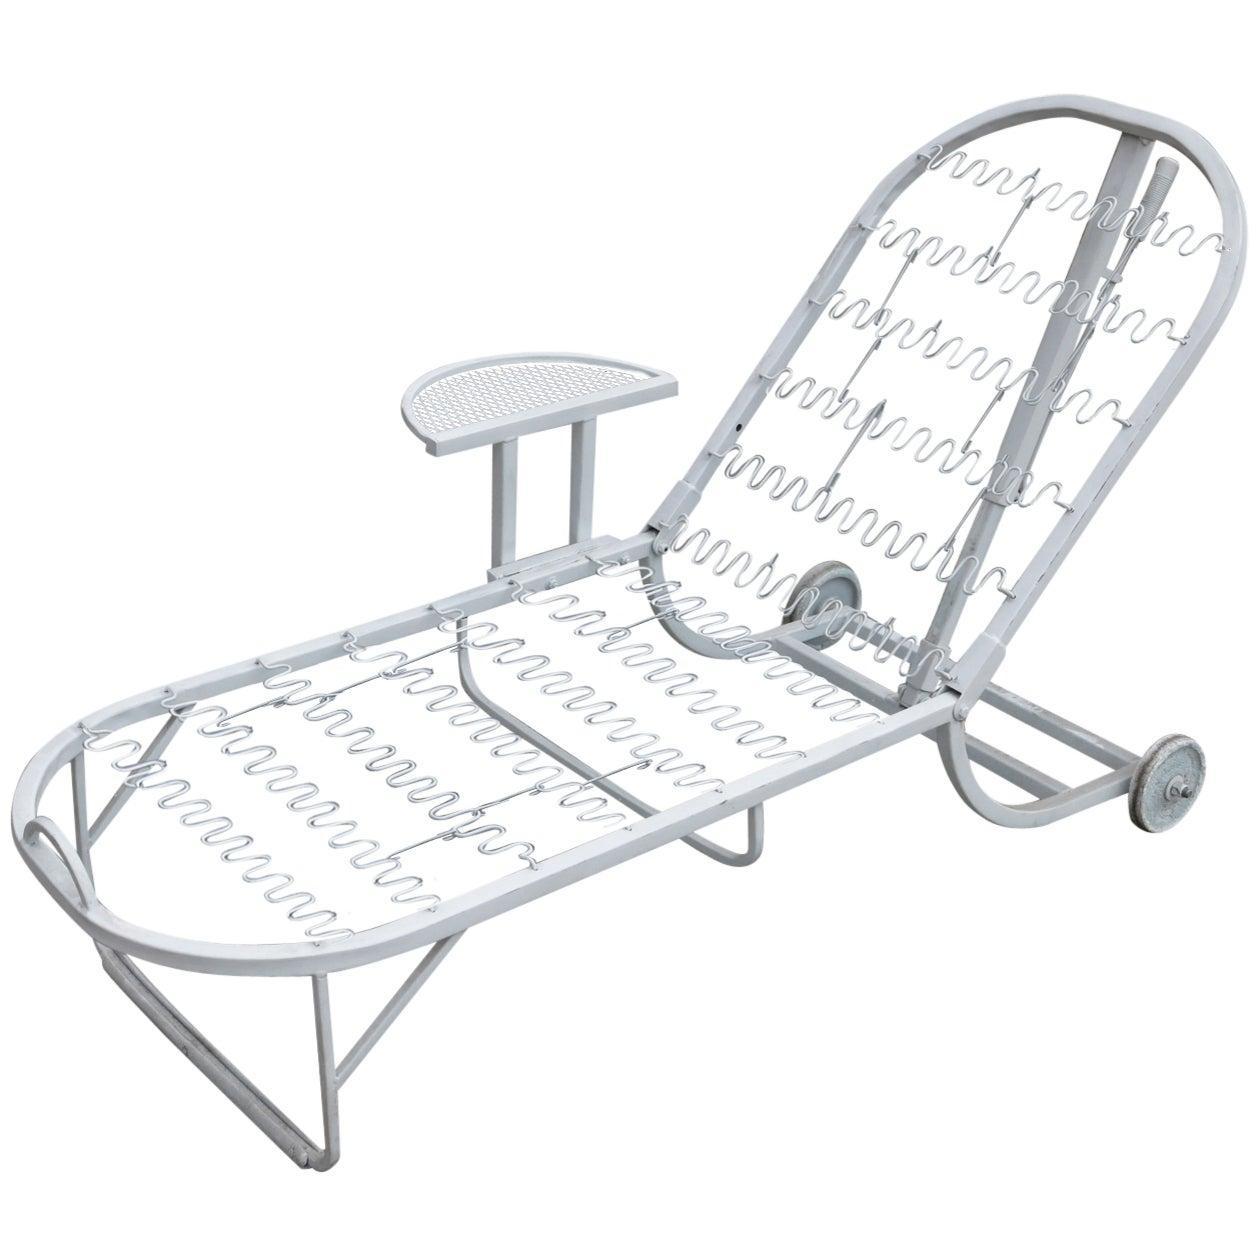 White square steel tubular outdoor / patio chaise lounges, produced in 1960 by the Woodard Furniture Company. This comfortable and stylish vintage chaise lounge features a fully adjustable reclining back and back wheels for easy moving. The modern